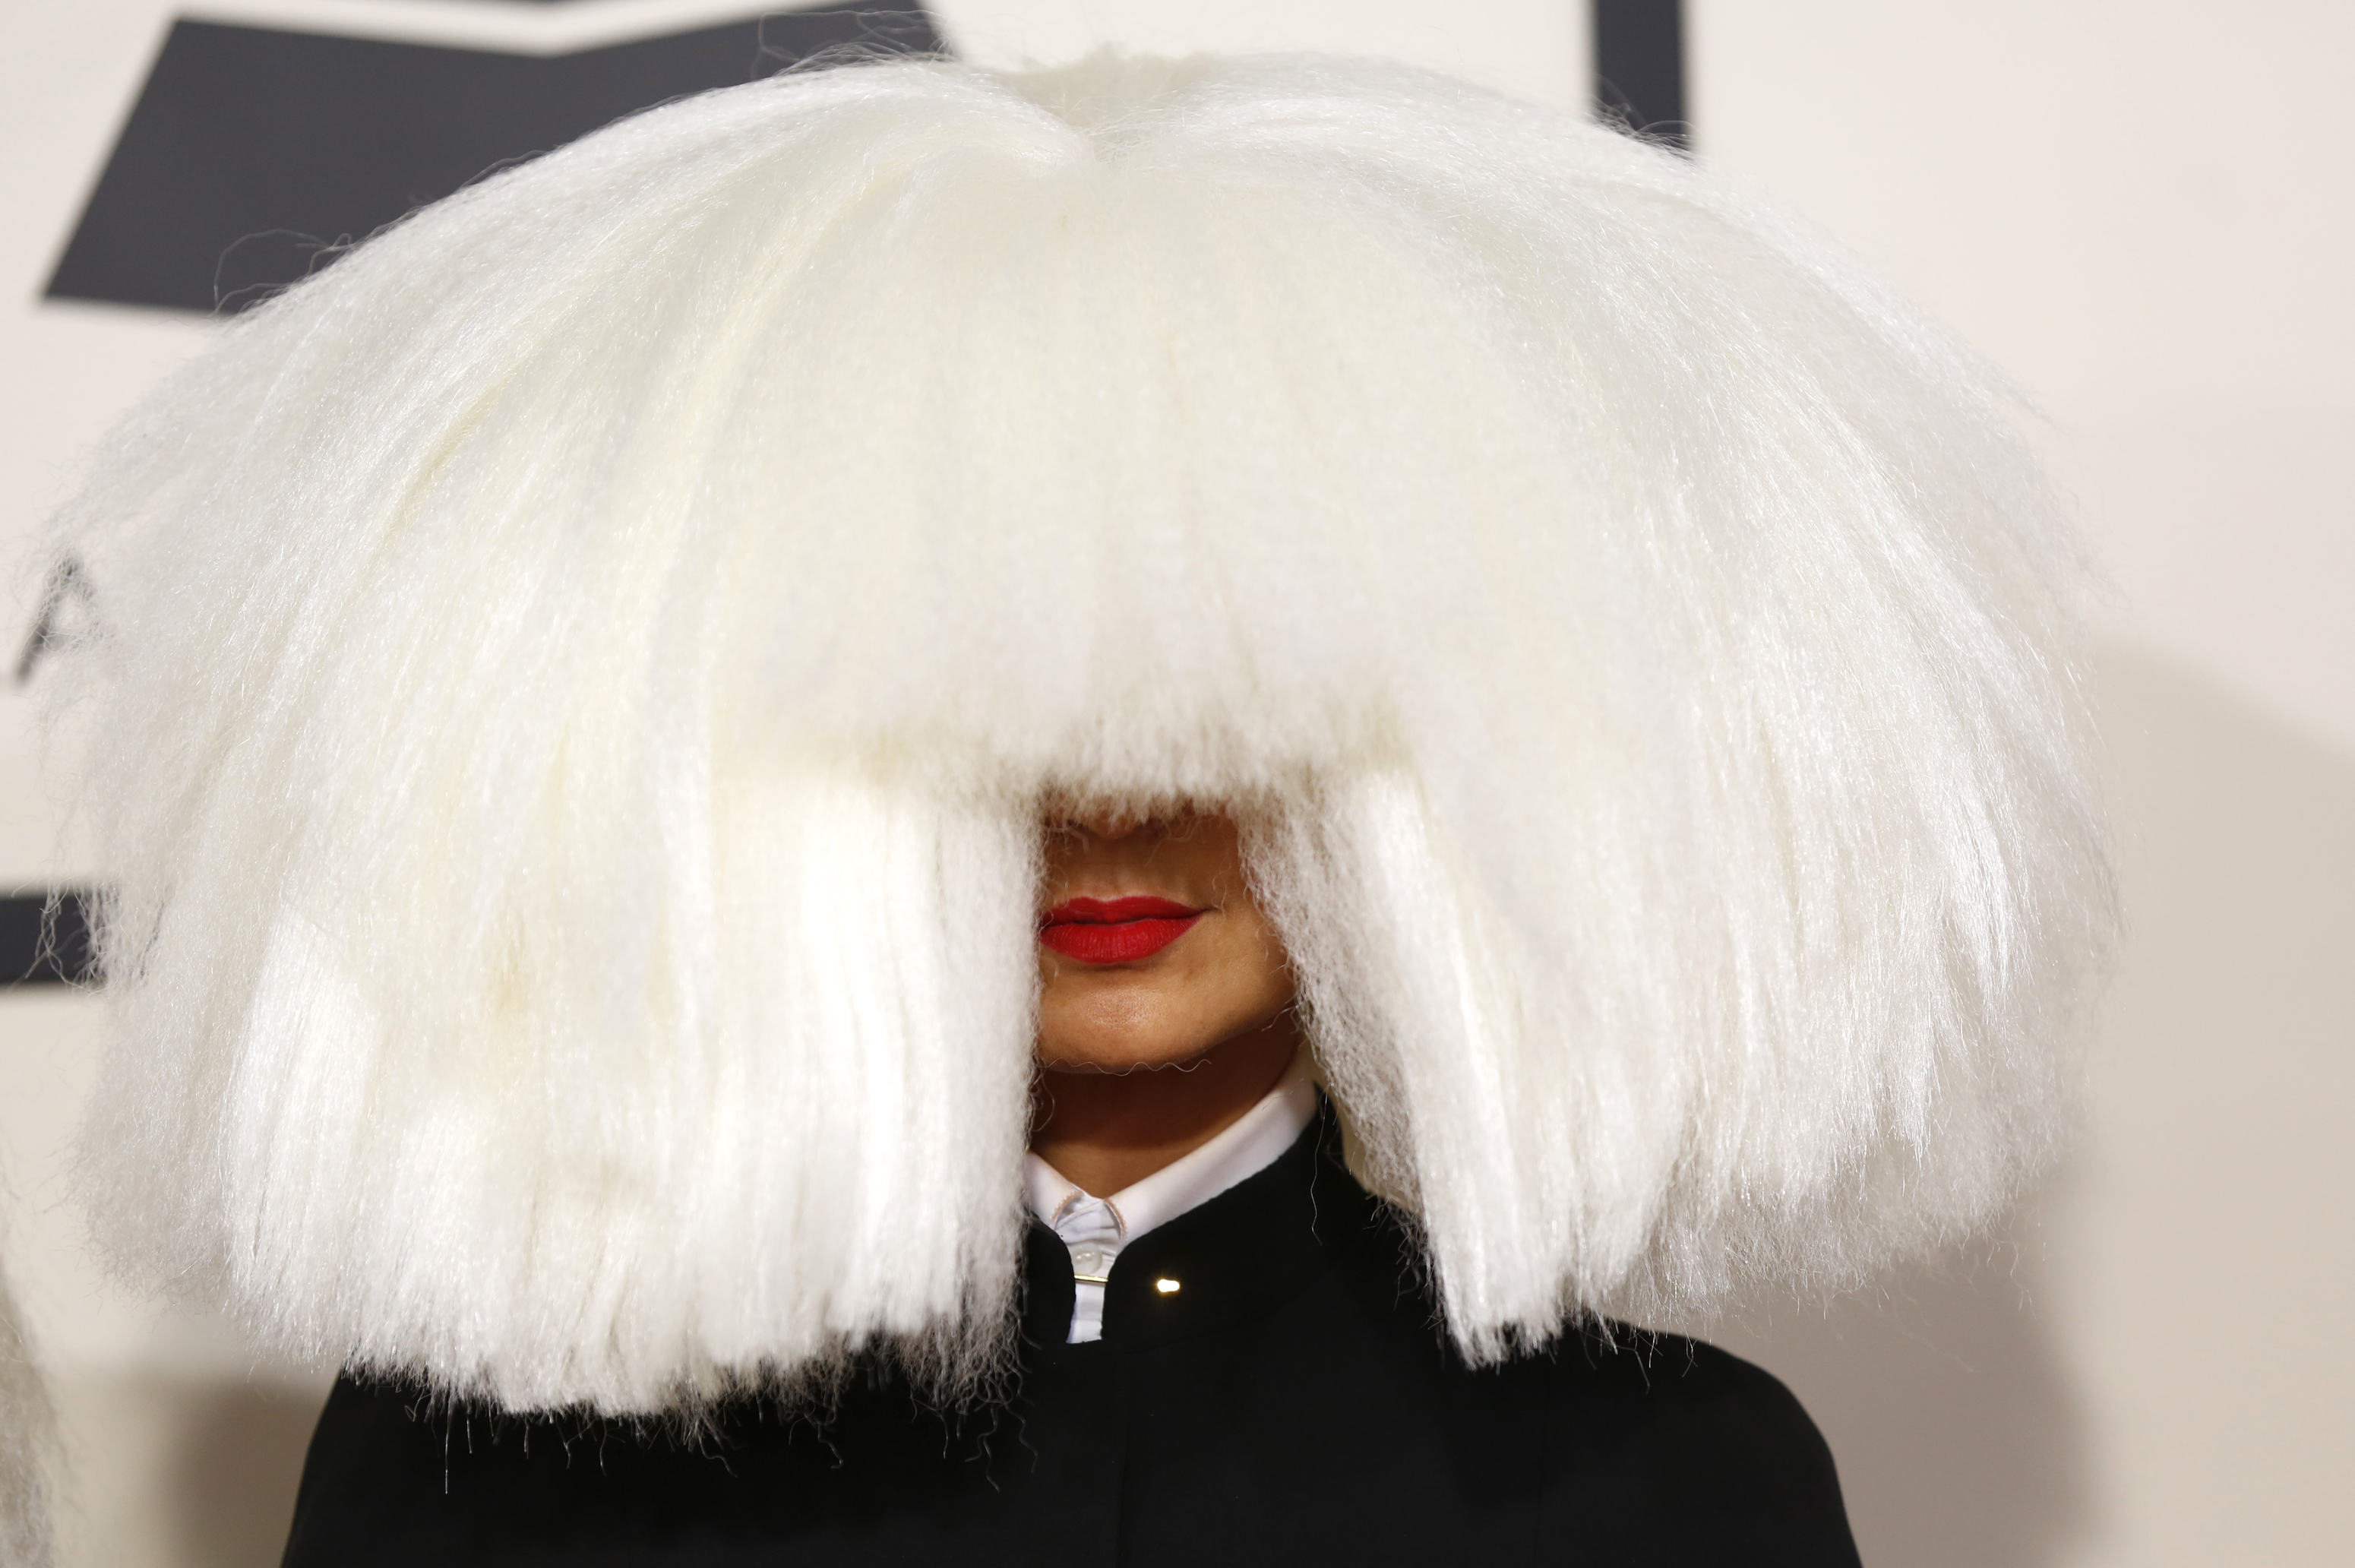 Sia surprises "Survivor" finalist with 100,000 prize for being an